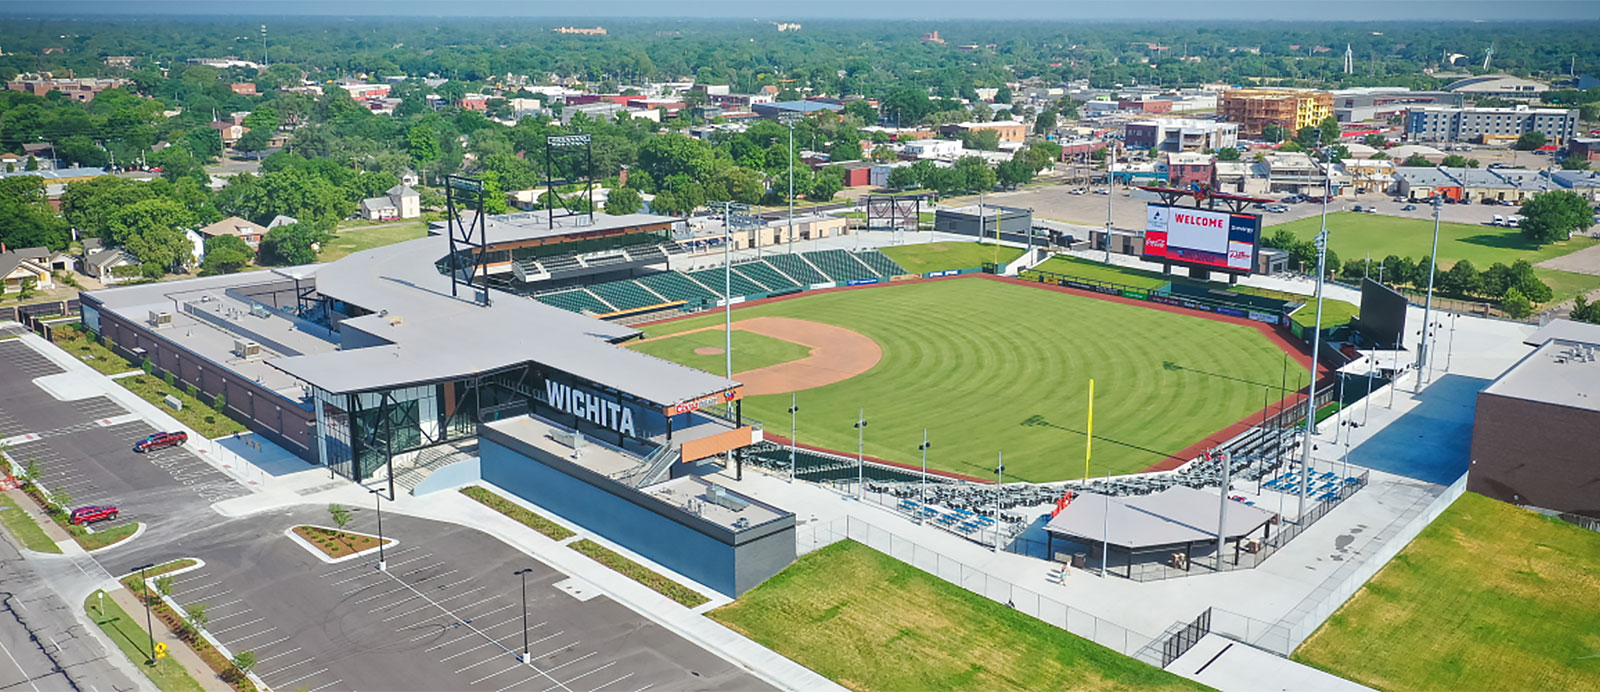 Commercial Roofing Riverfront Stadium